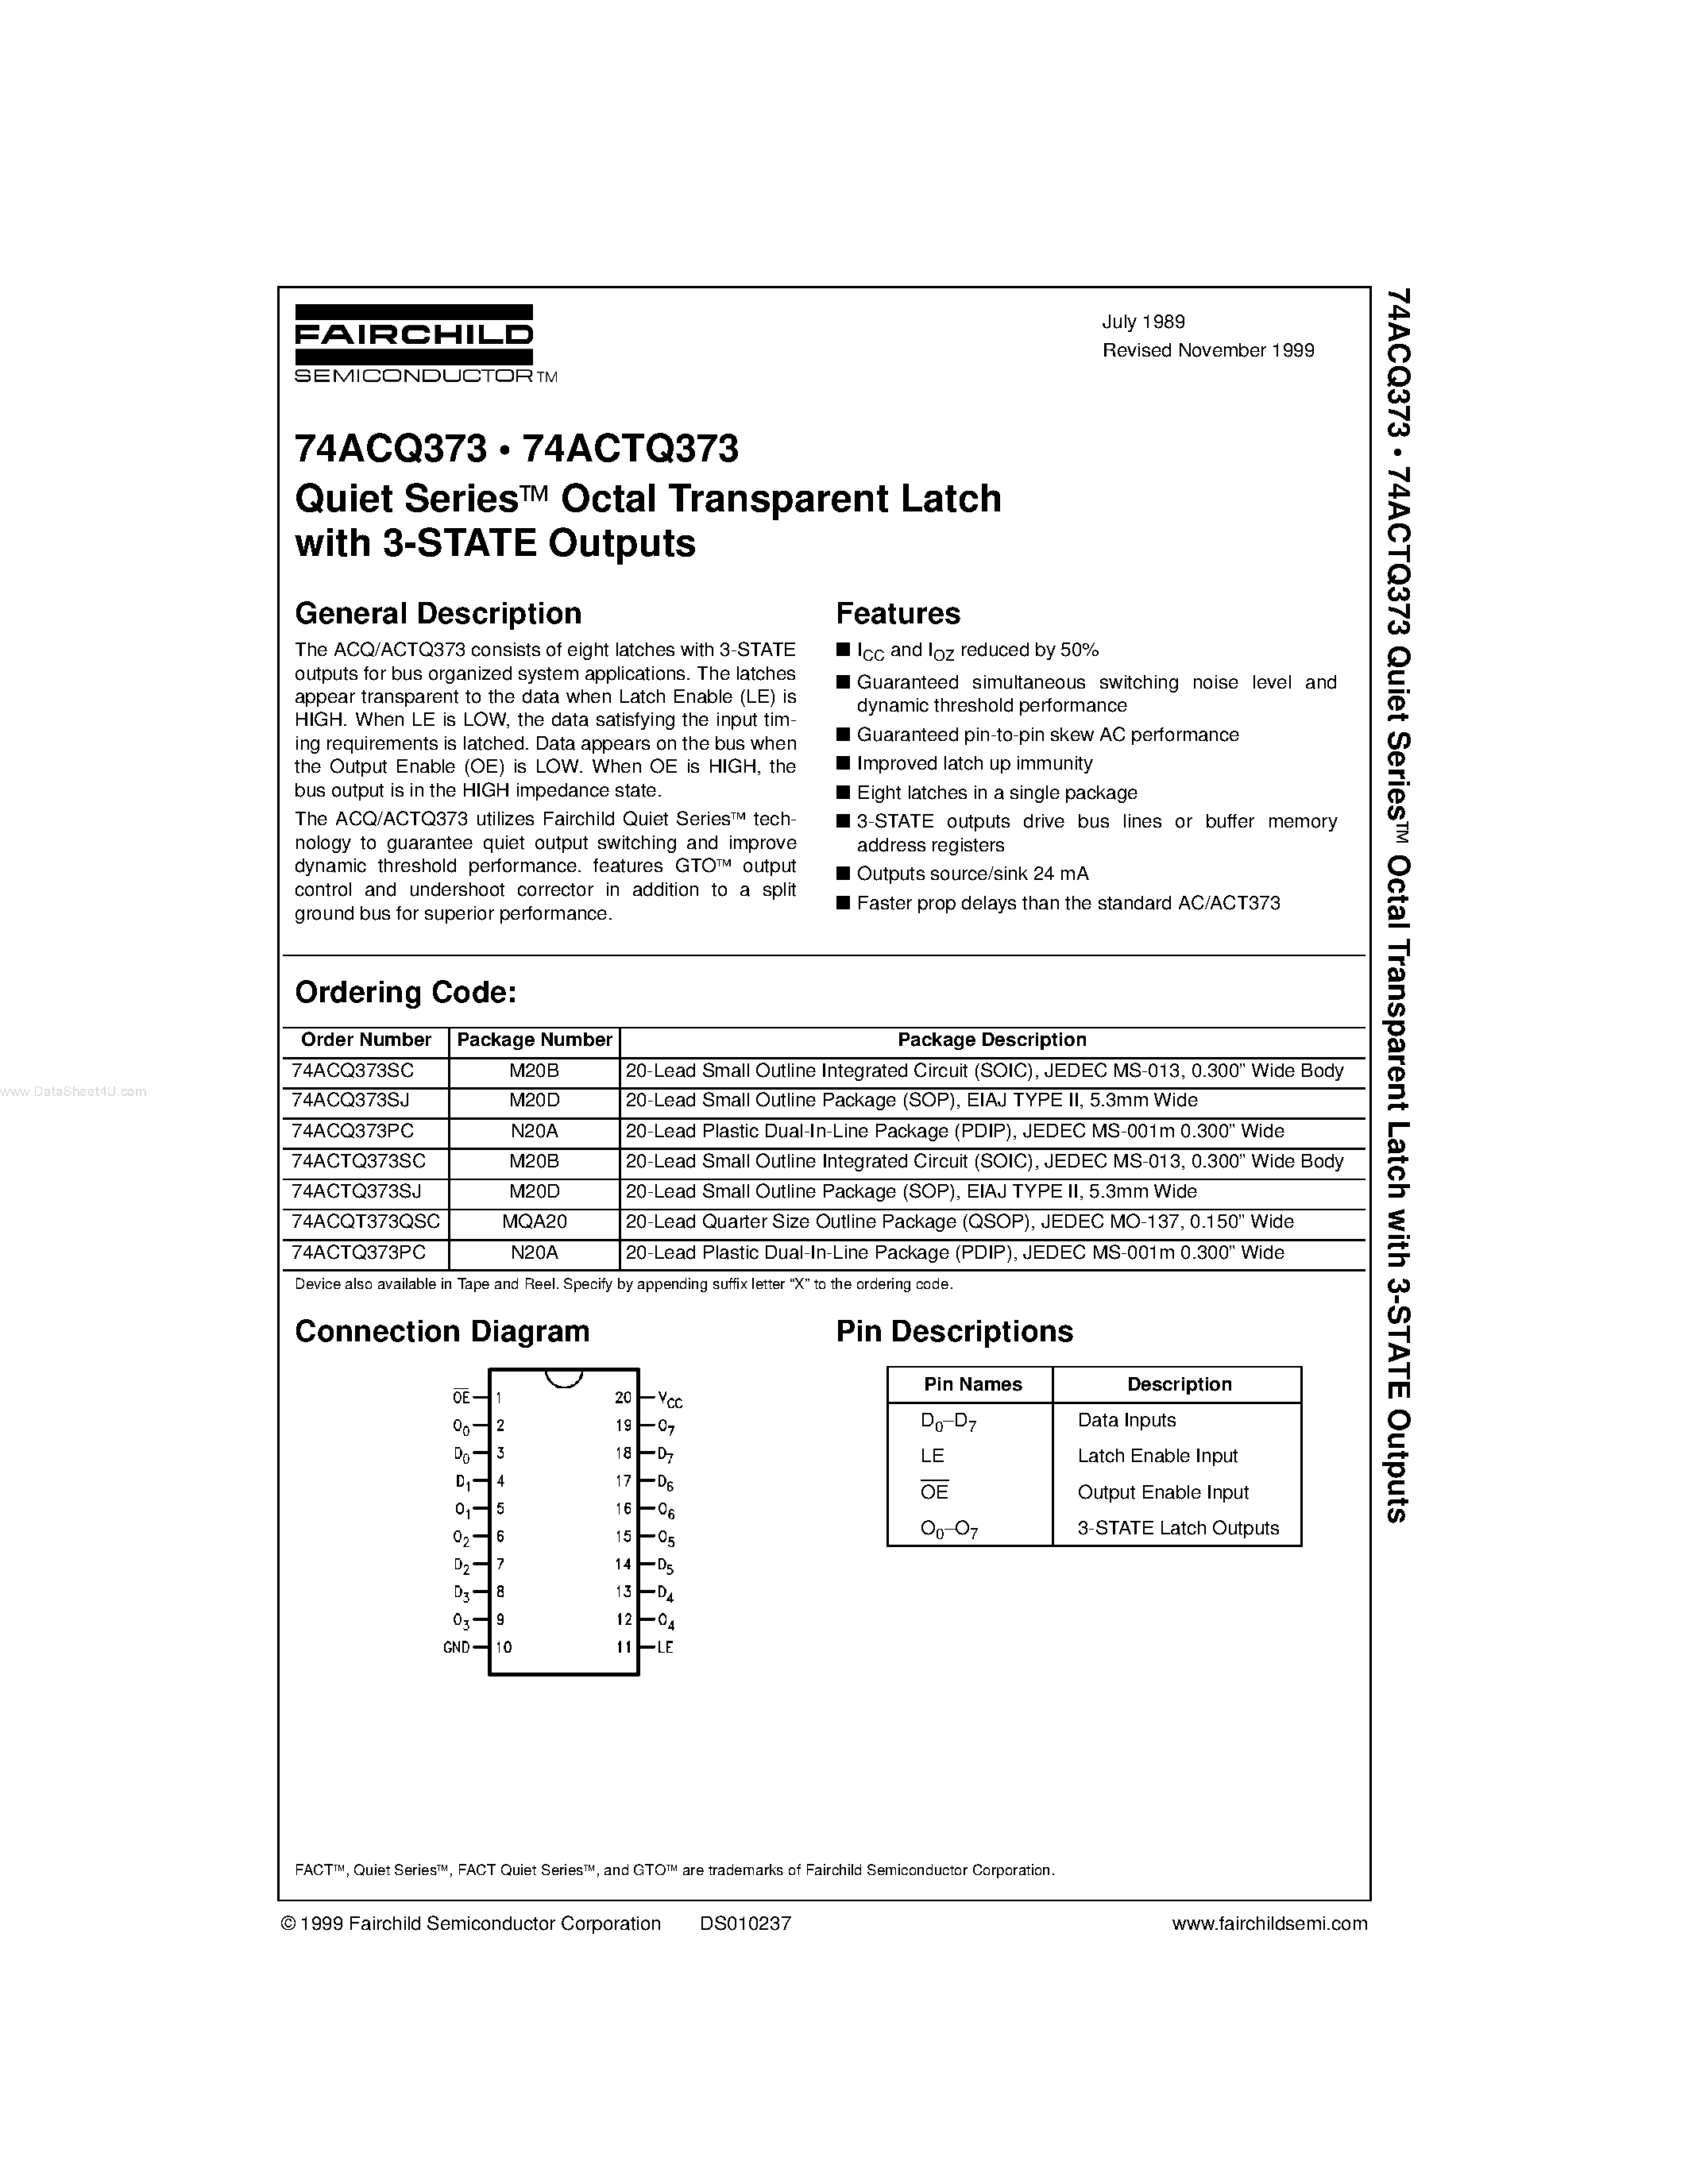 Datasheet 74ACQ373 - Quiet Series Octal Transparent Latch with 3-STATE Outputs page 1